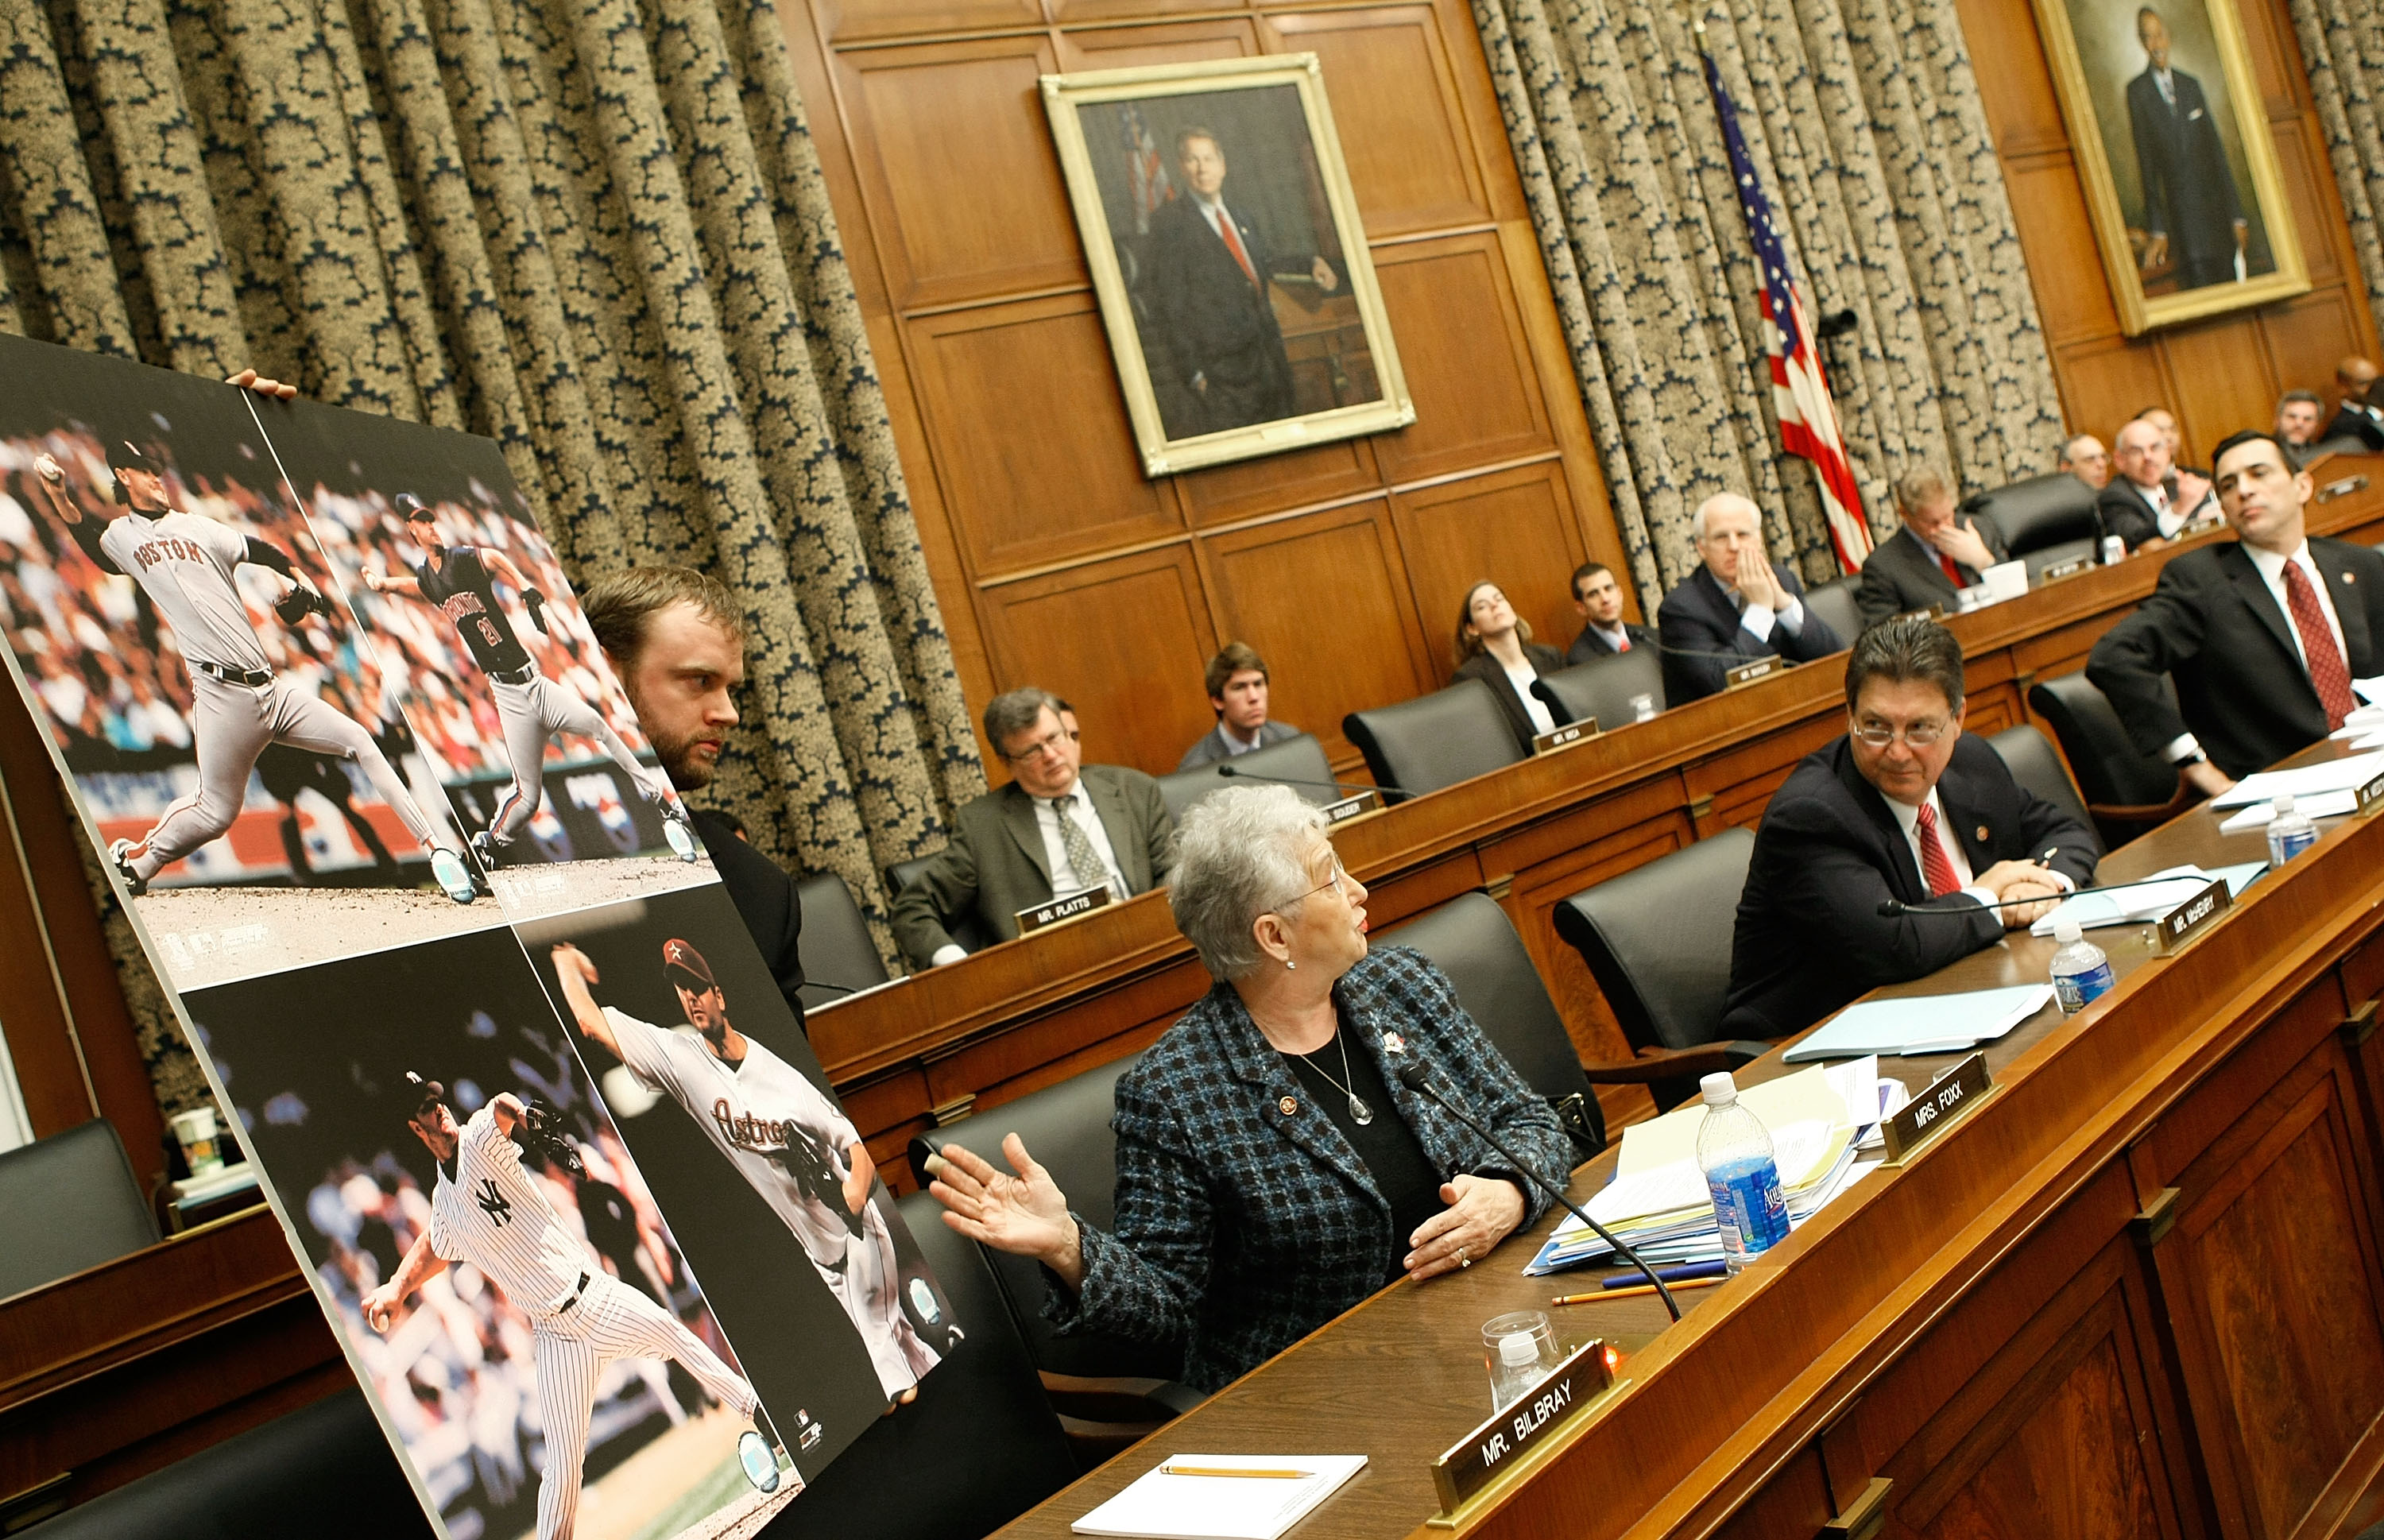 WASHINGTON - FEBRUARY 13:  Rep. Virginia Foxx (R- NC) shows pictures of Major League Baseball player Roger Clemens during a House Oversight and Government Reform Committee hearing February 13, 2008 in Washington, DC. The committee is hearing testimony on